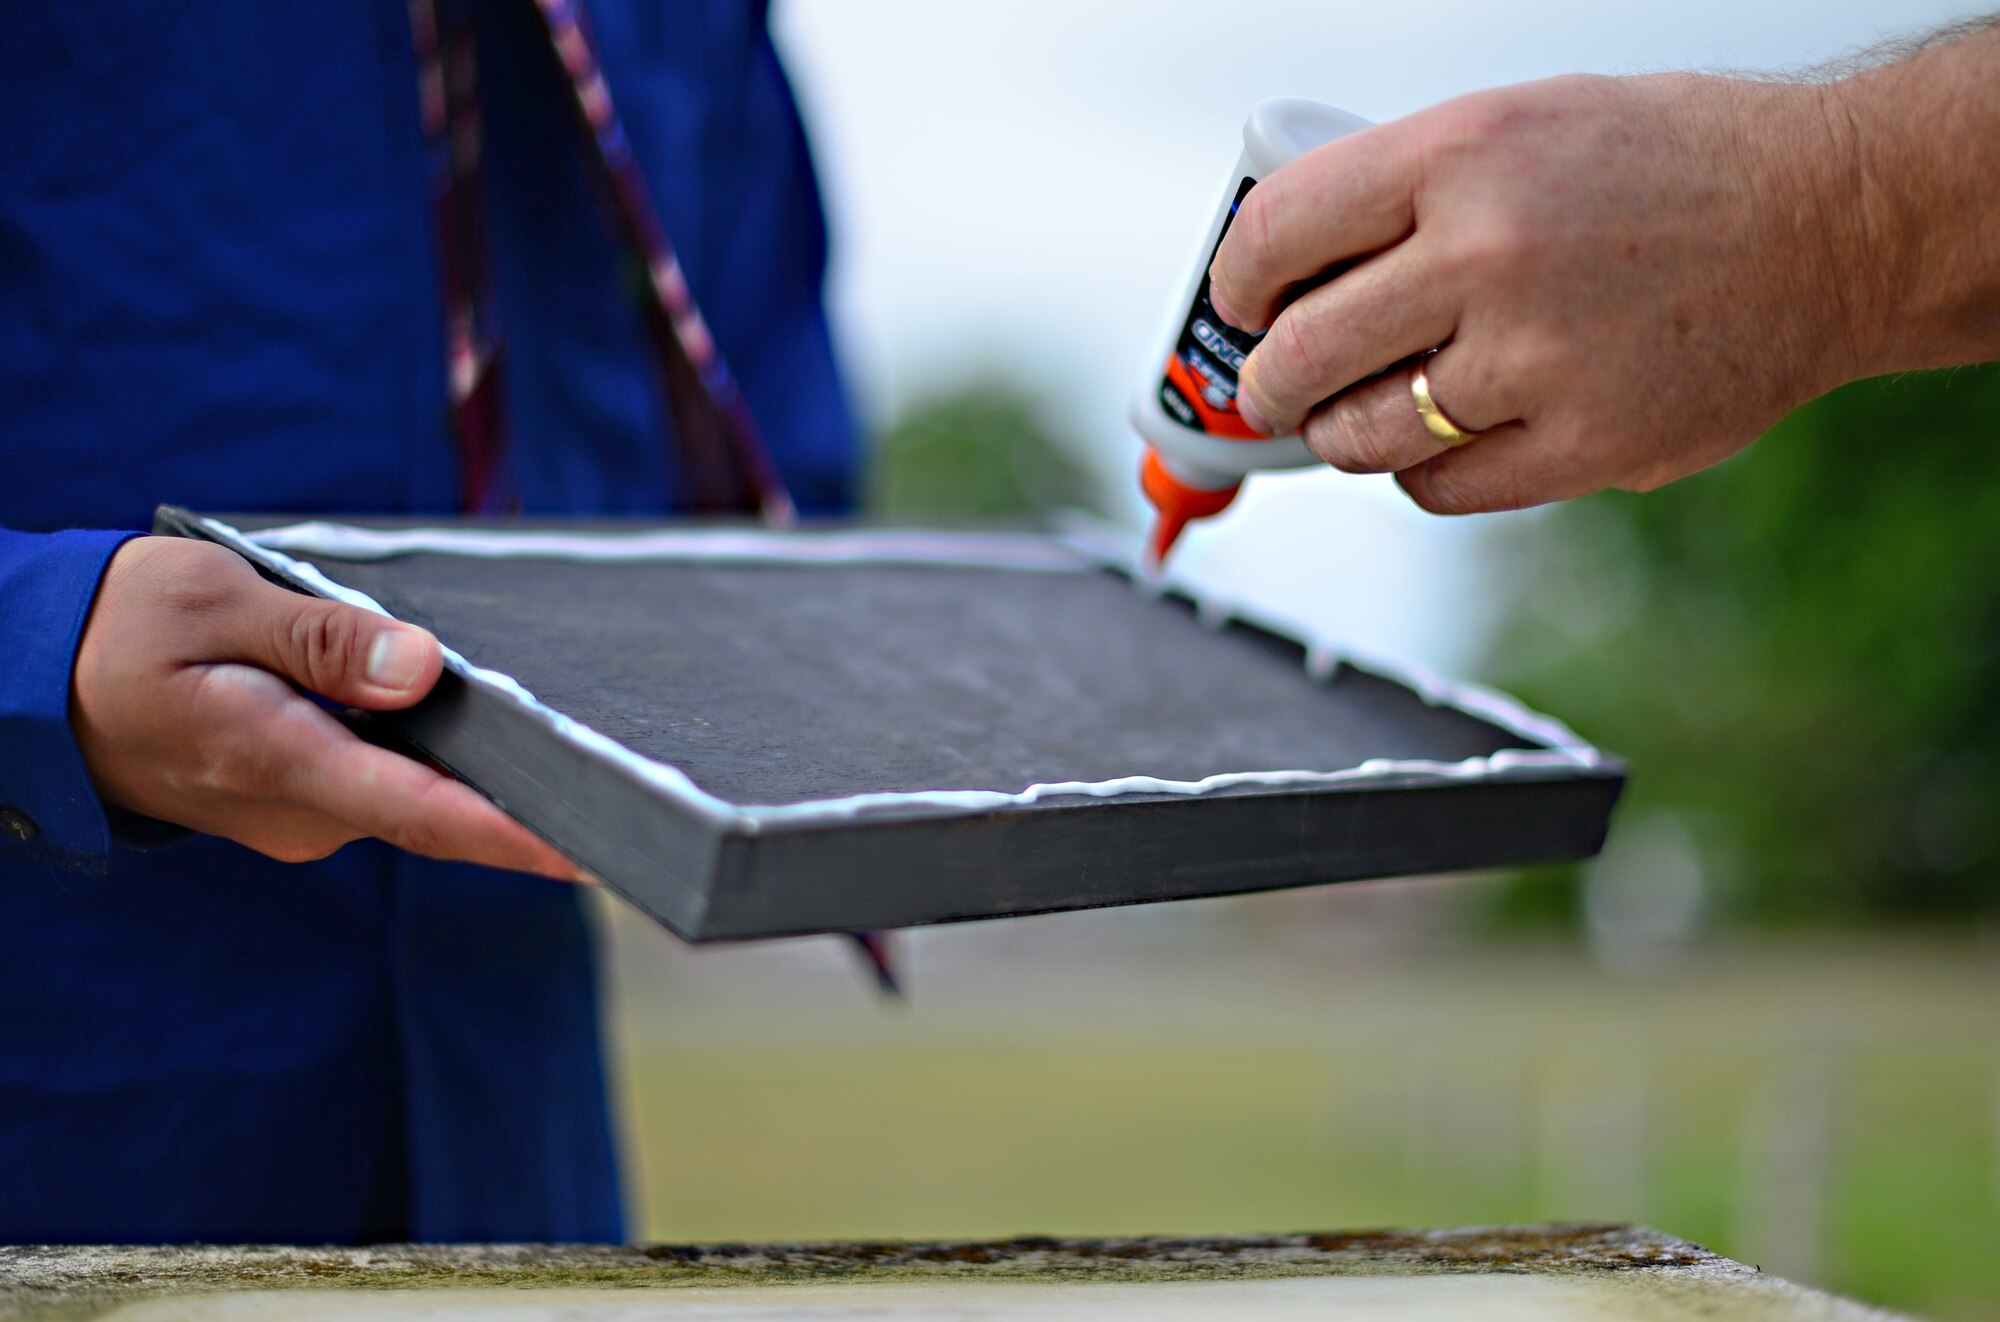 Josh Kelley, a former Air Force Junior ROTC member, and his father Terry, apply glue to the surface of a memorial plaque dedicated to the 495th Tactical Fighter Squadron, a deactivated fighter squadron, at Royal Air Force Lakenheath, England, June 19, 2015. Activated in 1977, the squadron functioned as a replacement training unit for the Liberty Wing’s 492nd, 493rd and 494th Fighter Squadrons that are active today. (U.S. Air Force photo by Senior Airman Erin O’Shea/Released)